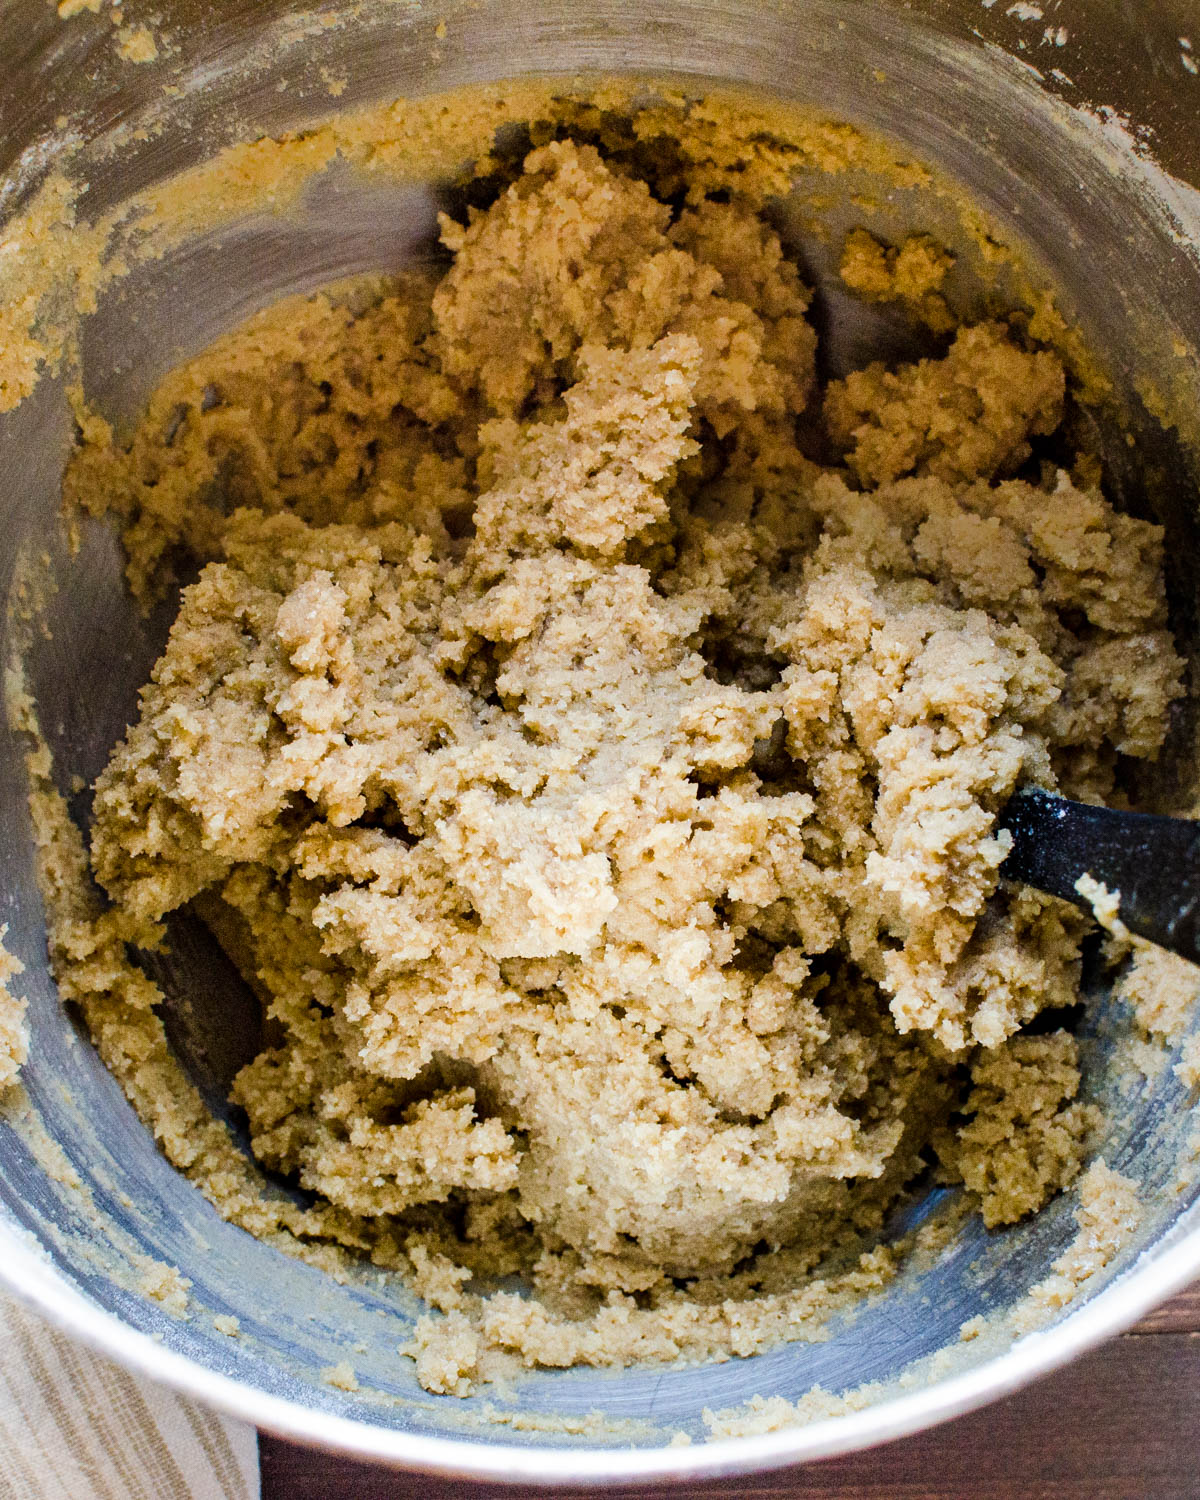 The dough after mixing.